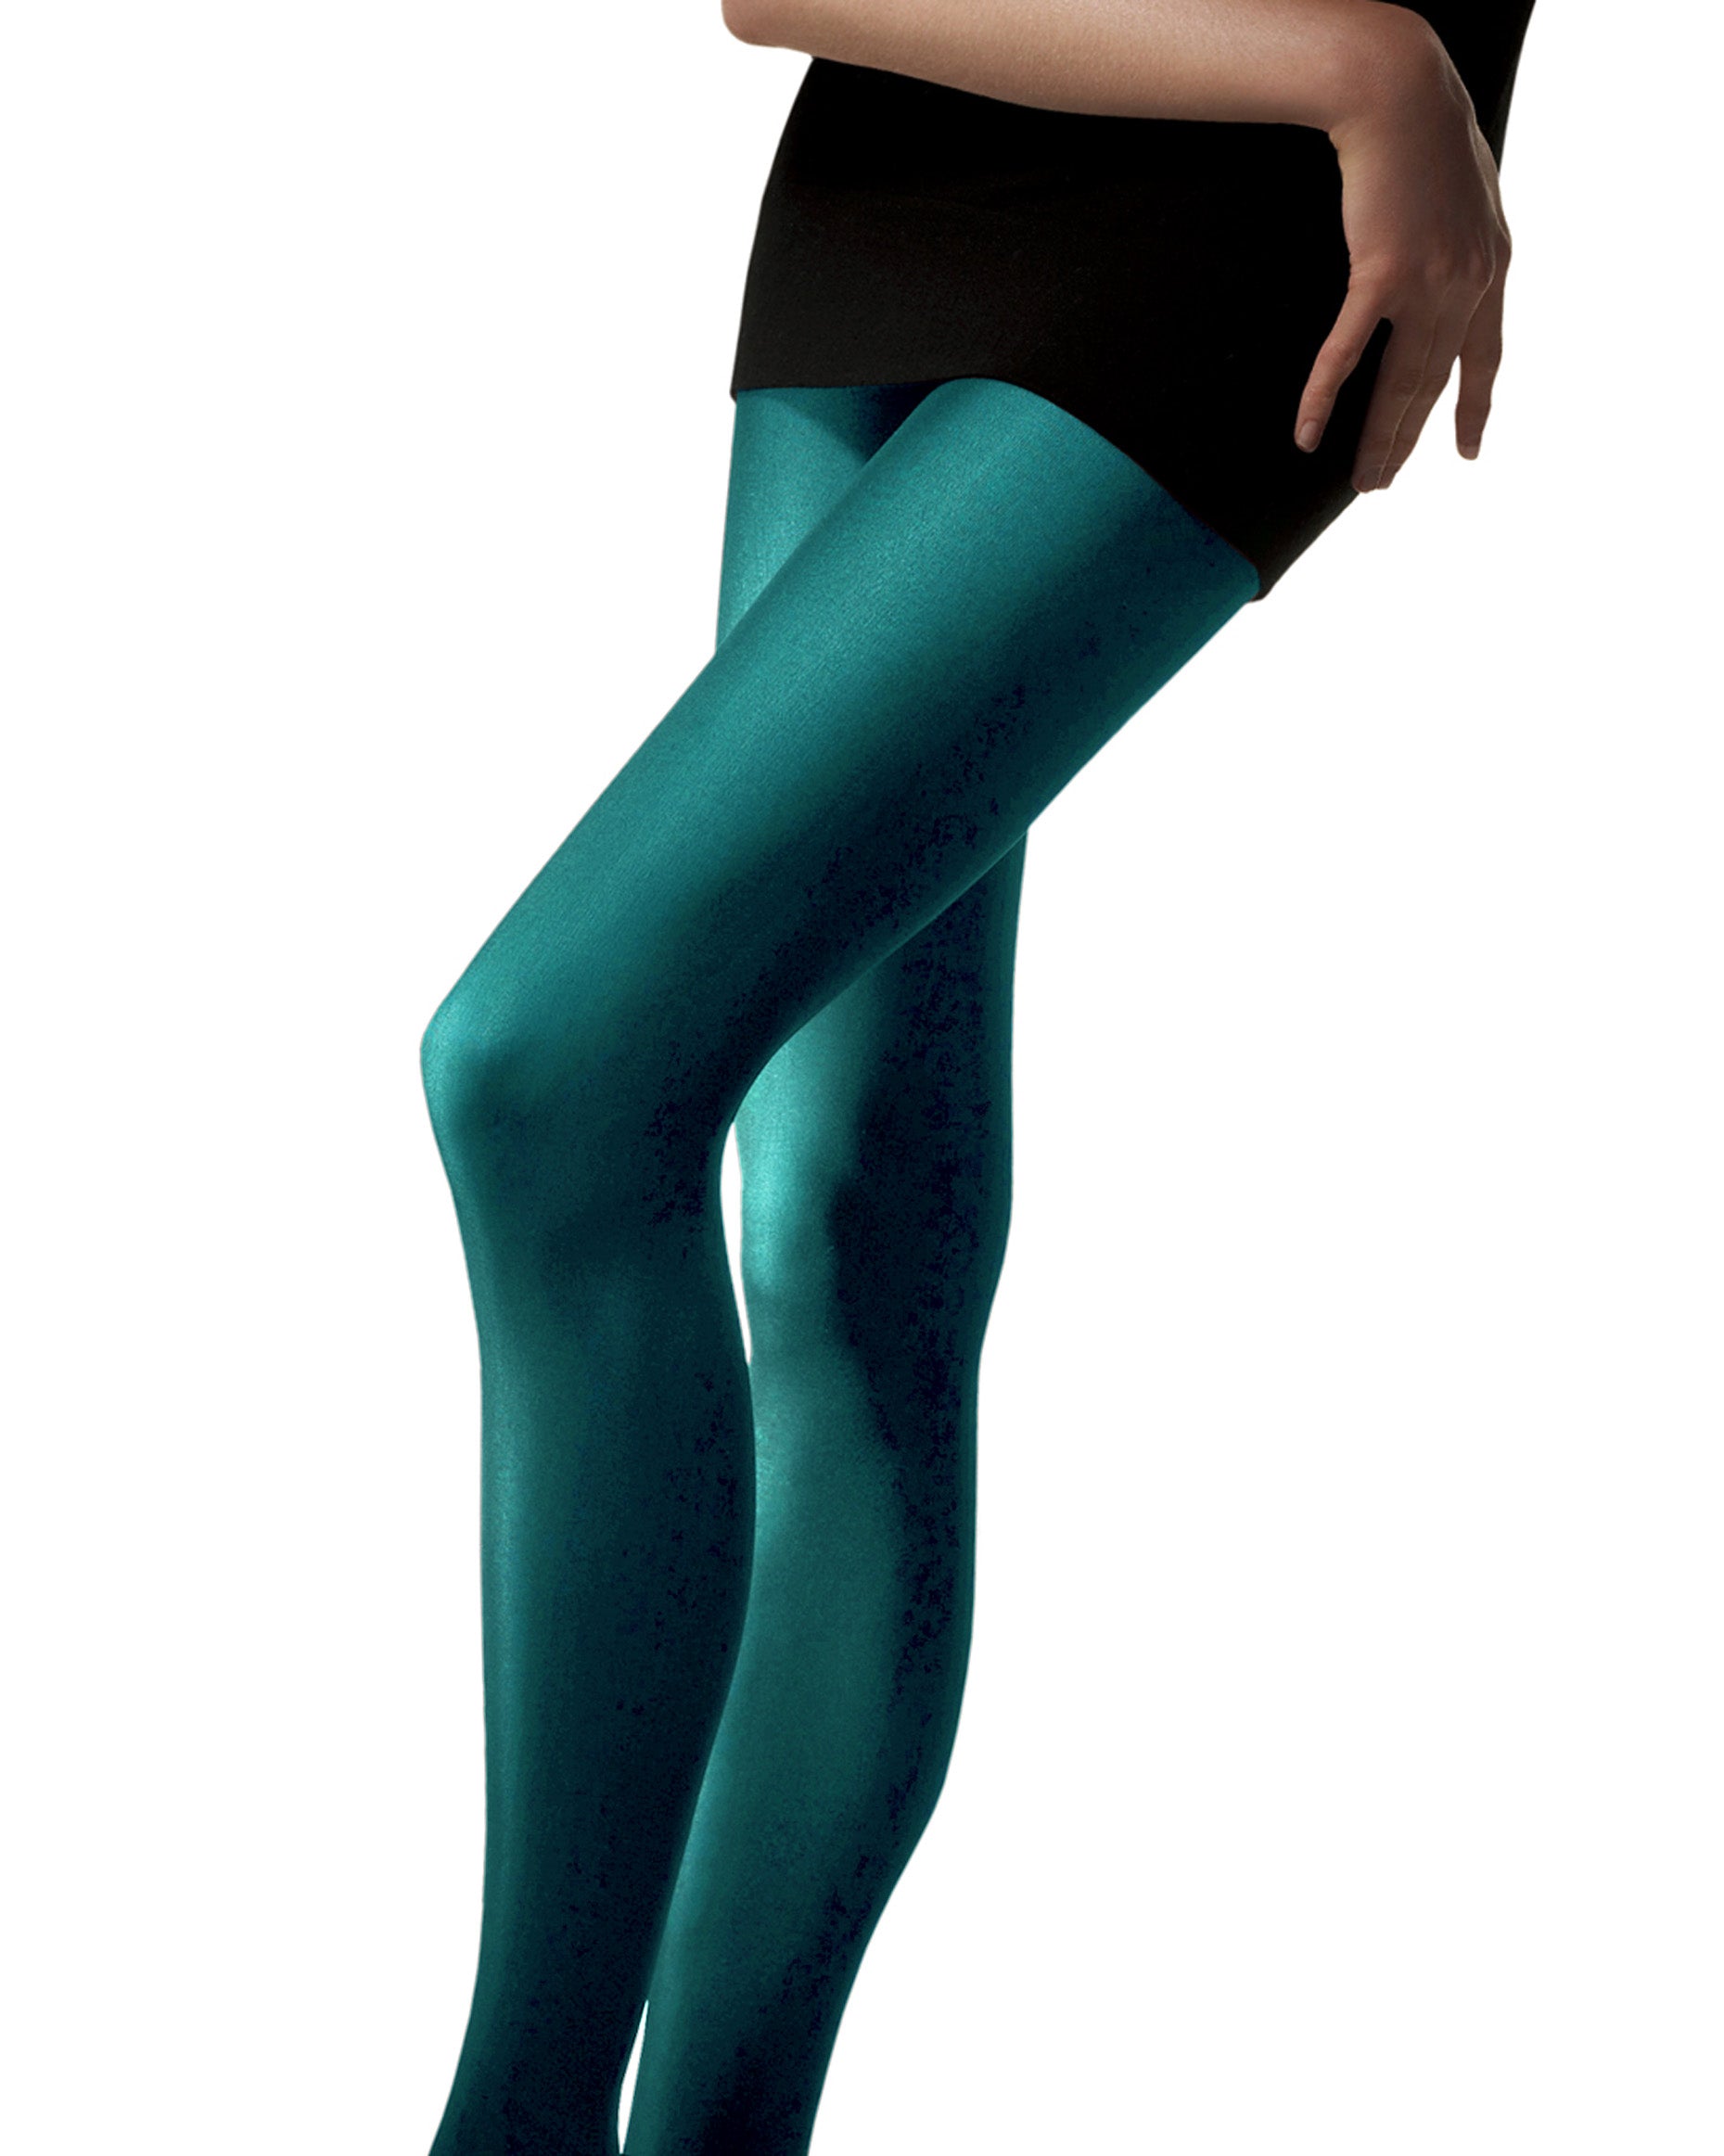 WOMEN'S OPAQUE TIGHTS OMSA VELOUR 30 XL Omsa - Omsa